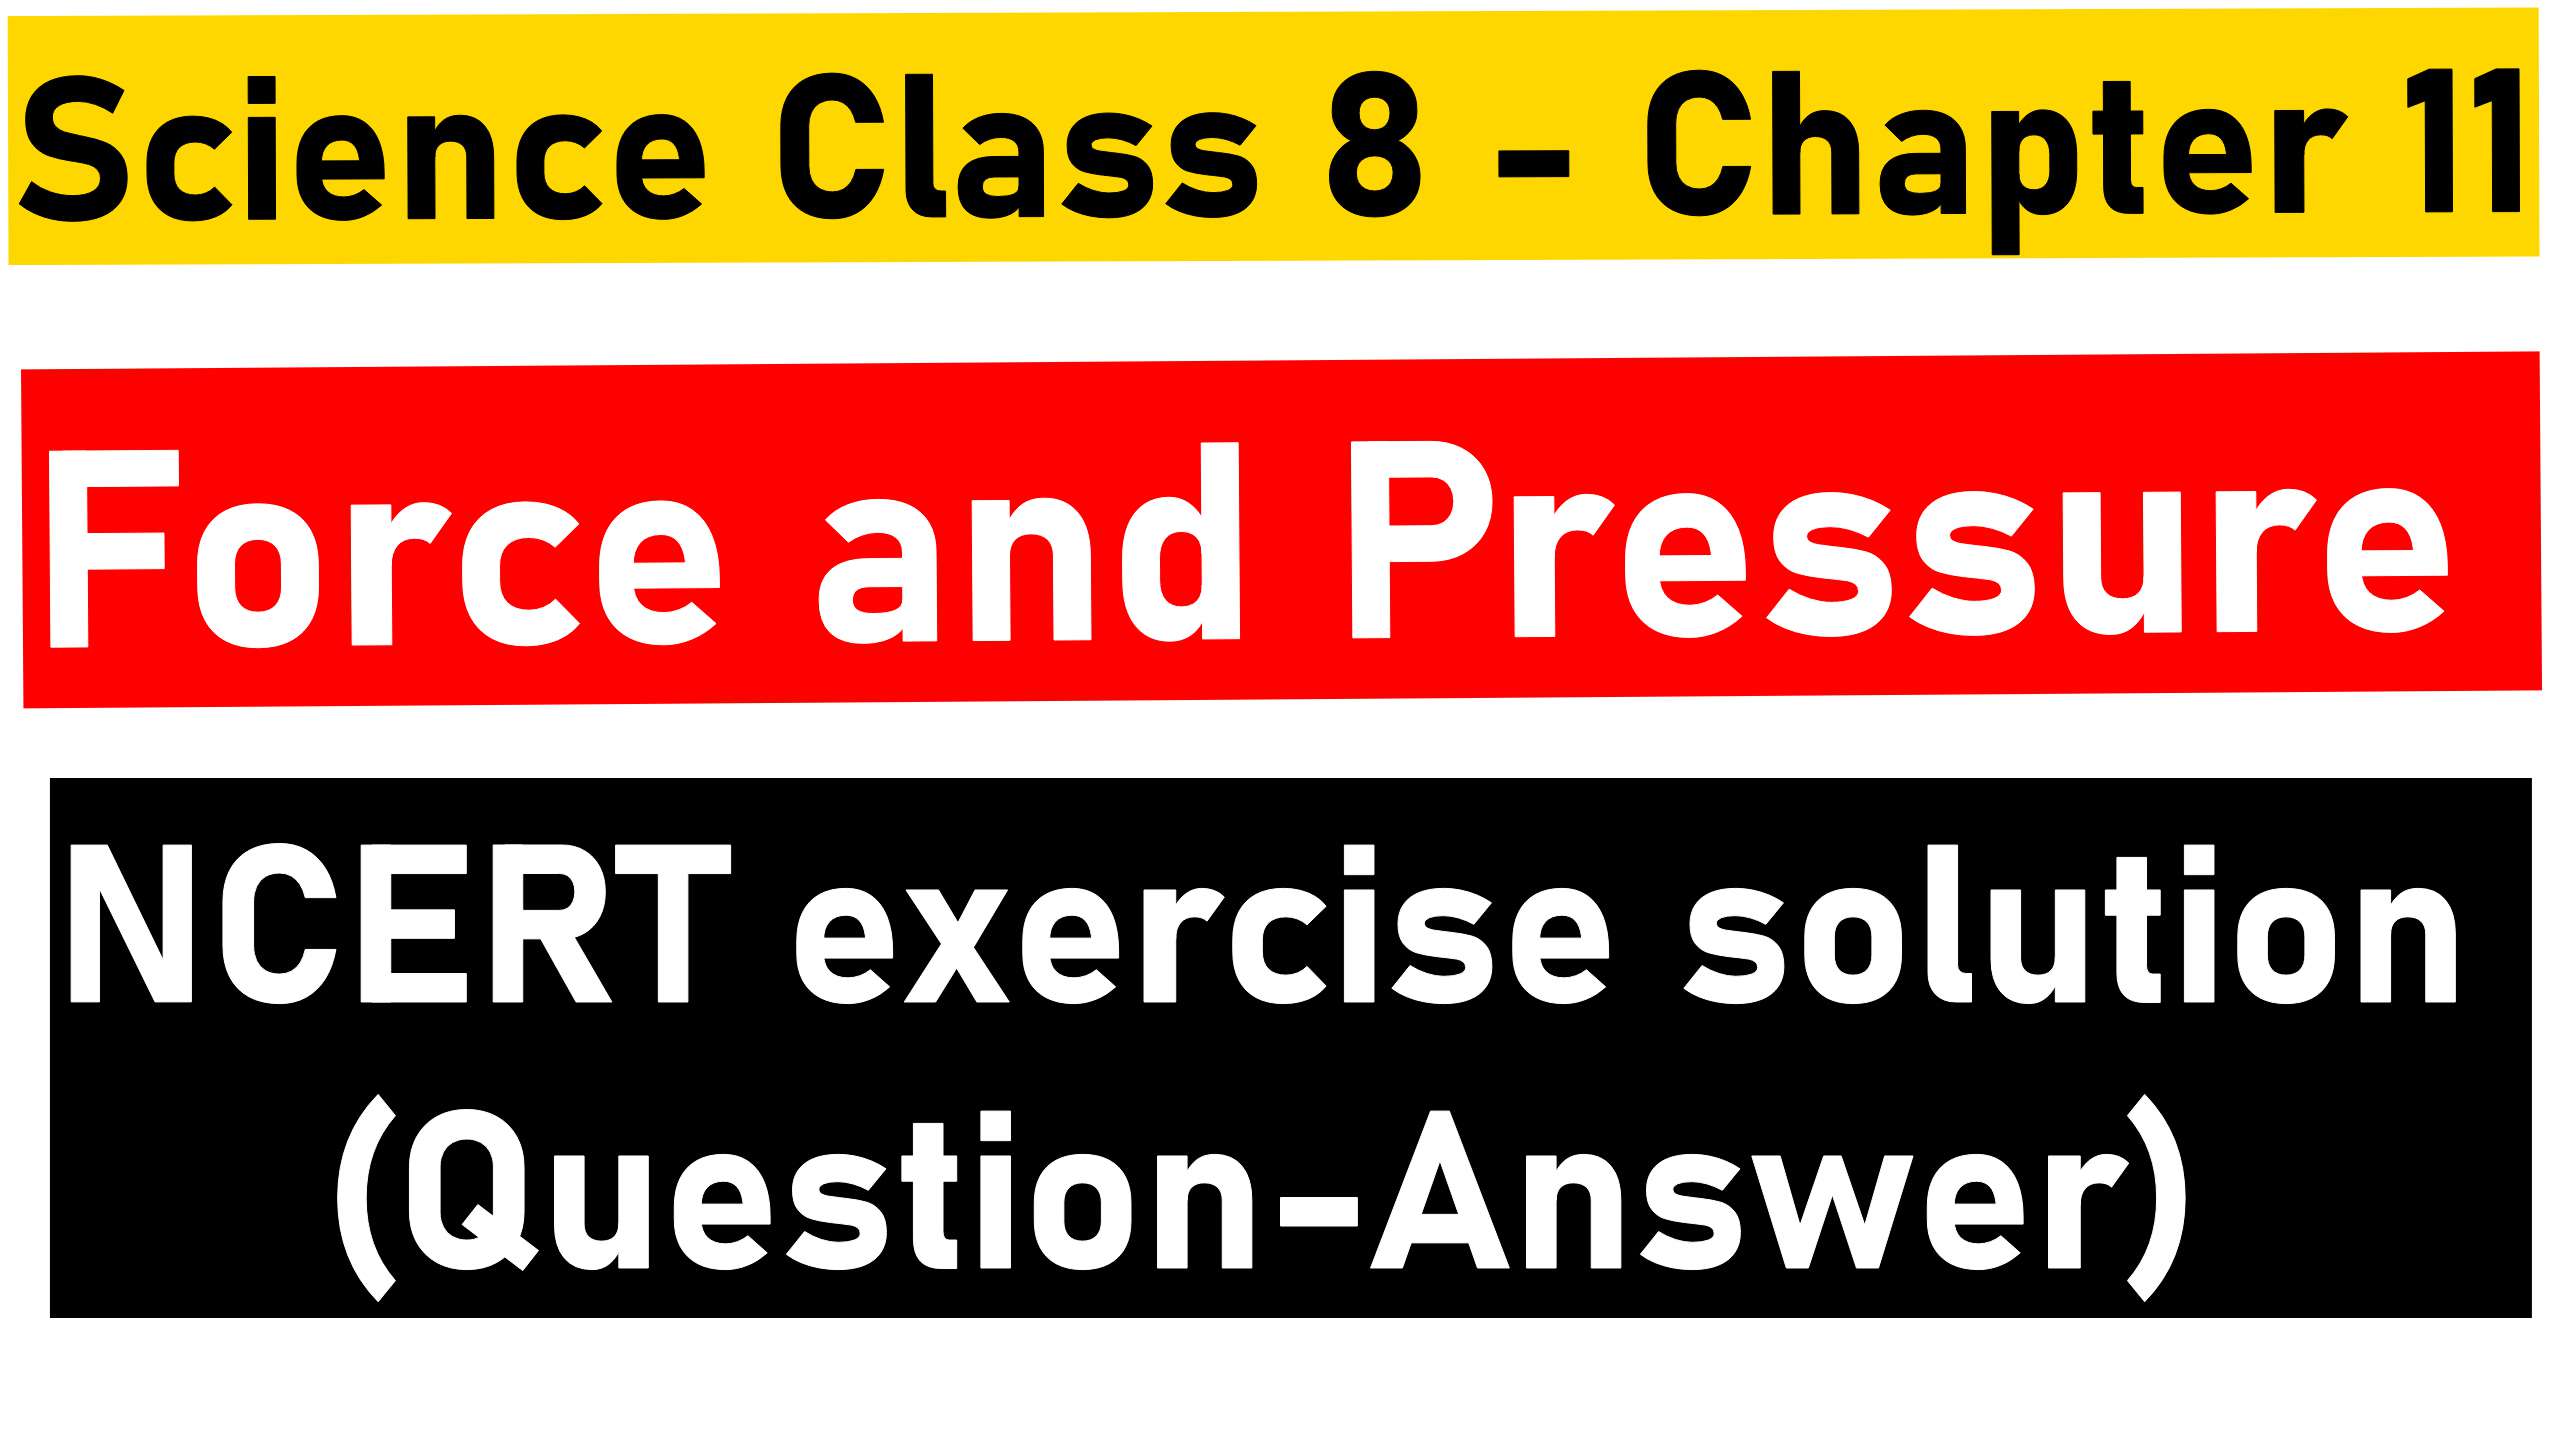 Science Class 8 - Chapter 11- Force and Pressure - NCERT exercise solution (Question-Answer)